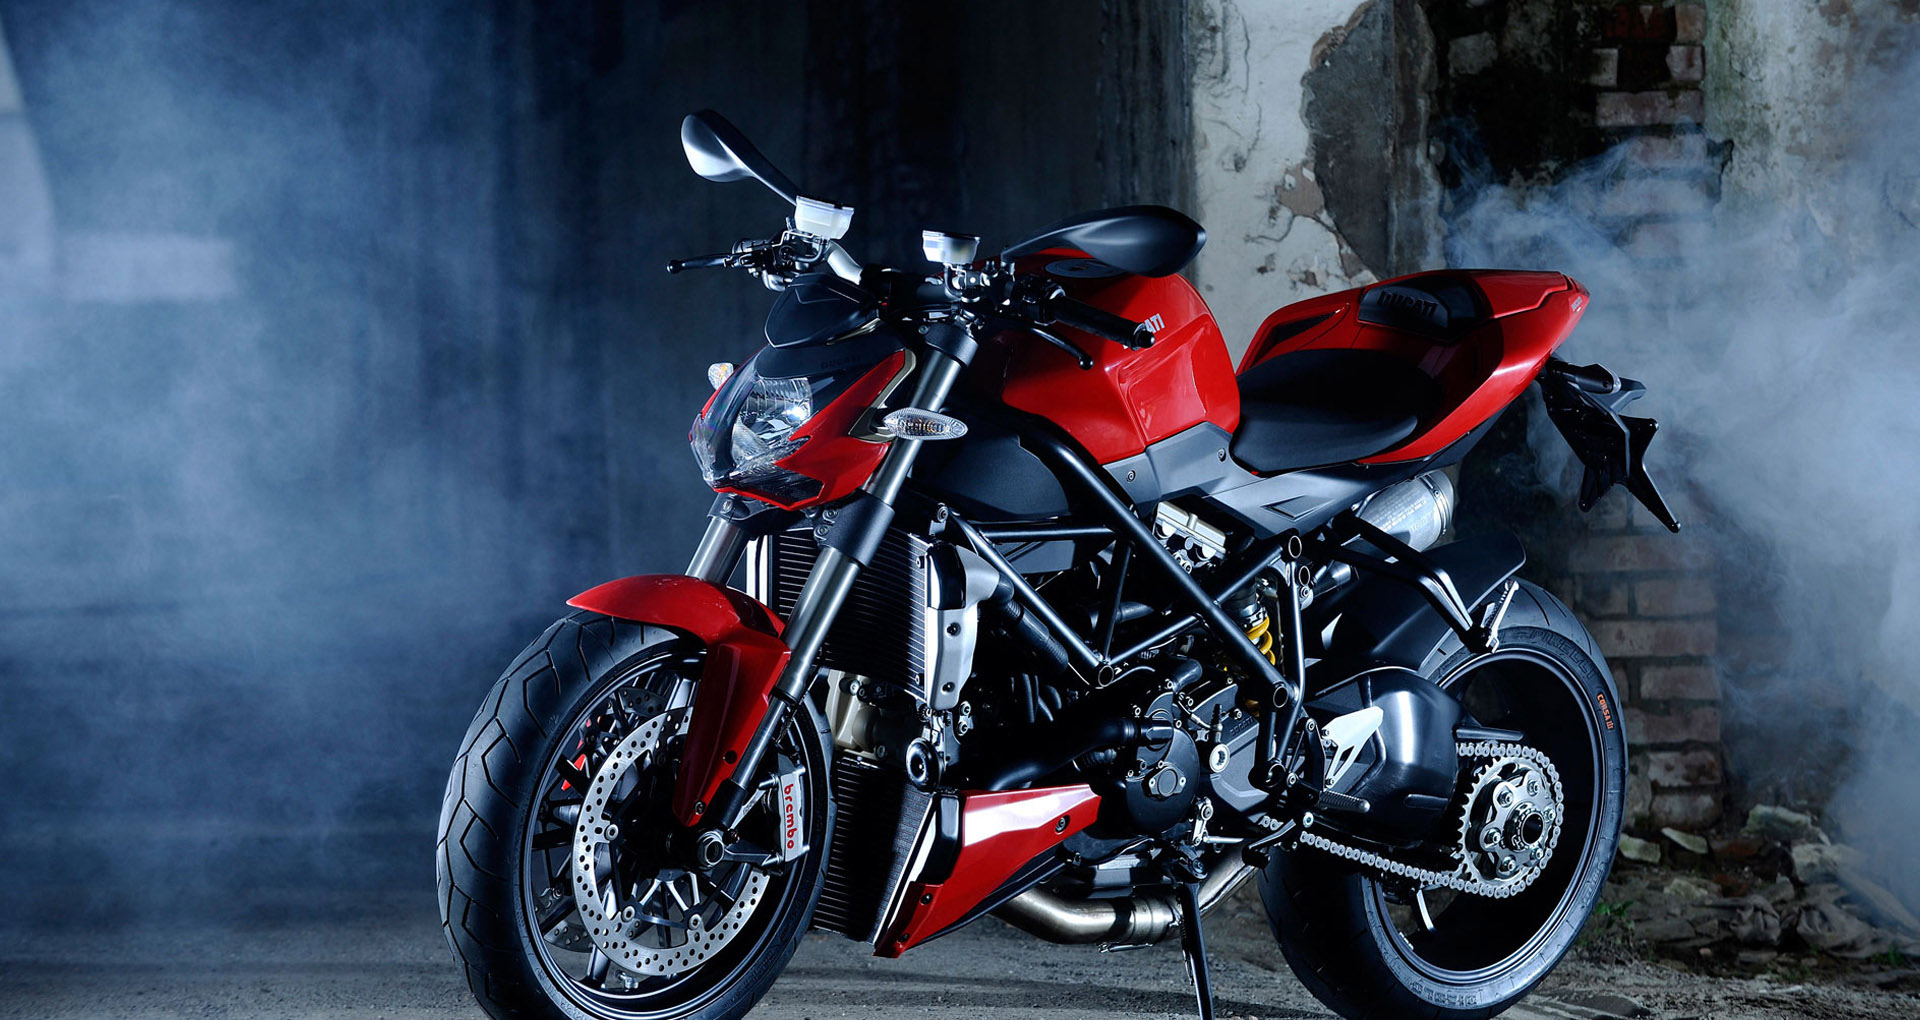 Ducati Latest Wallpapers With Resolutions 19201020 Pixel 1920x1020